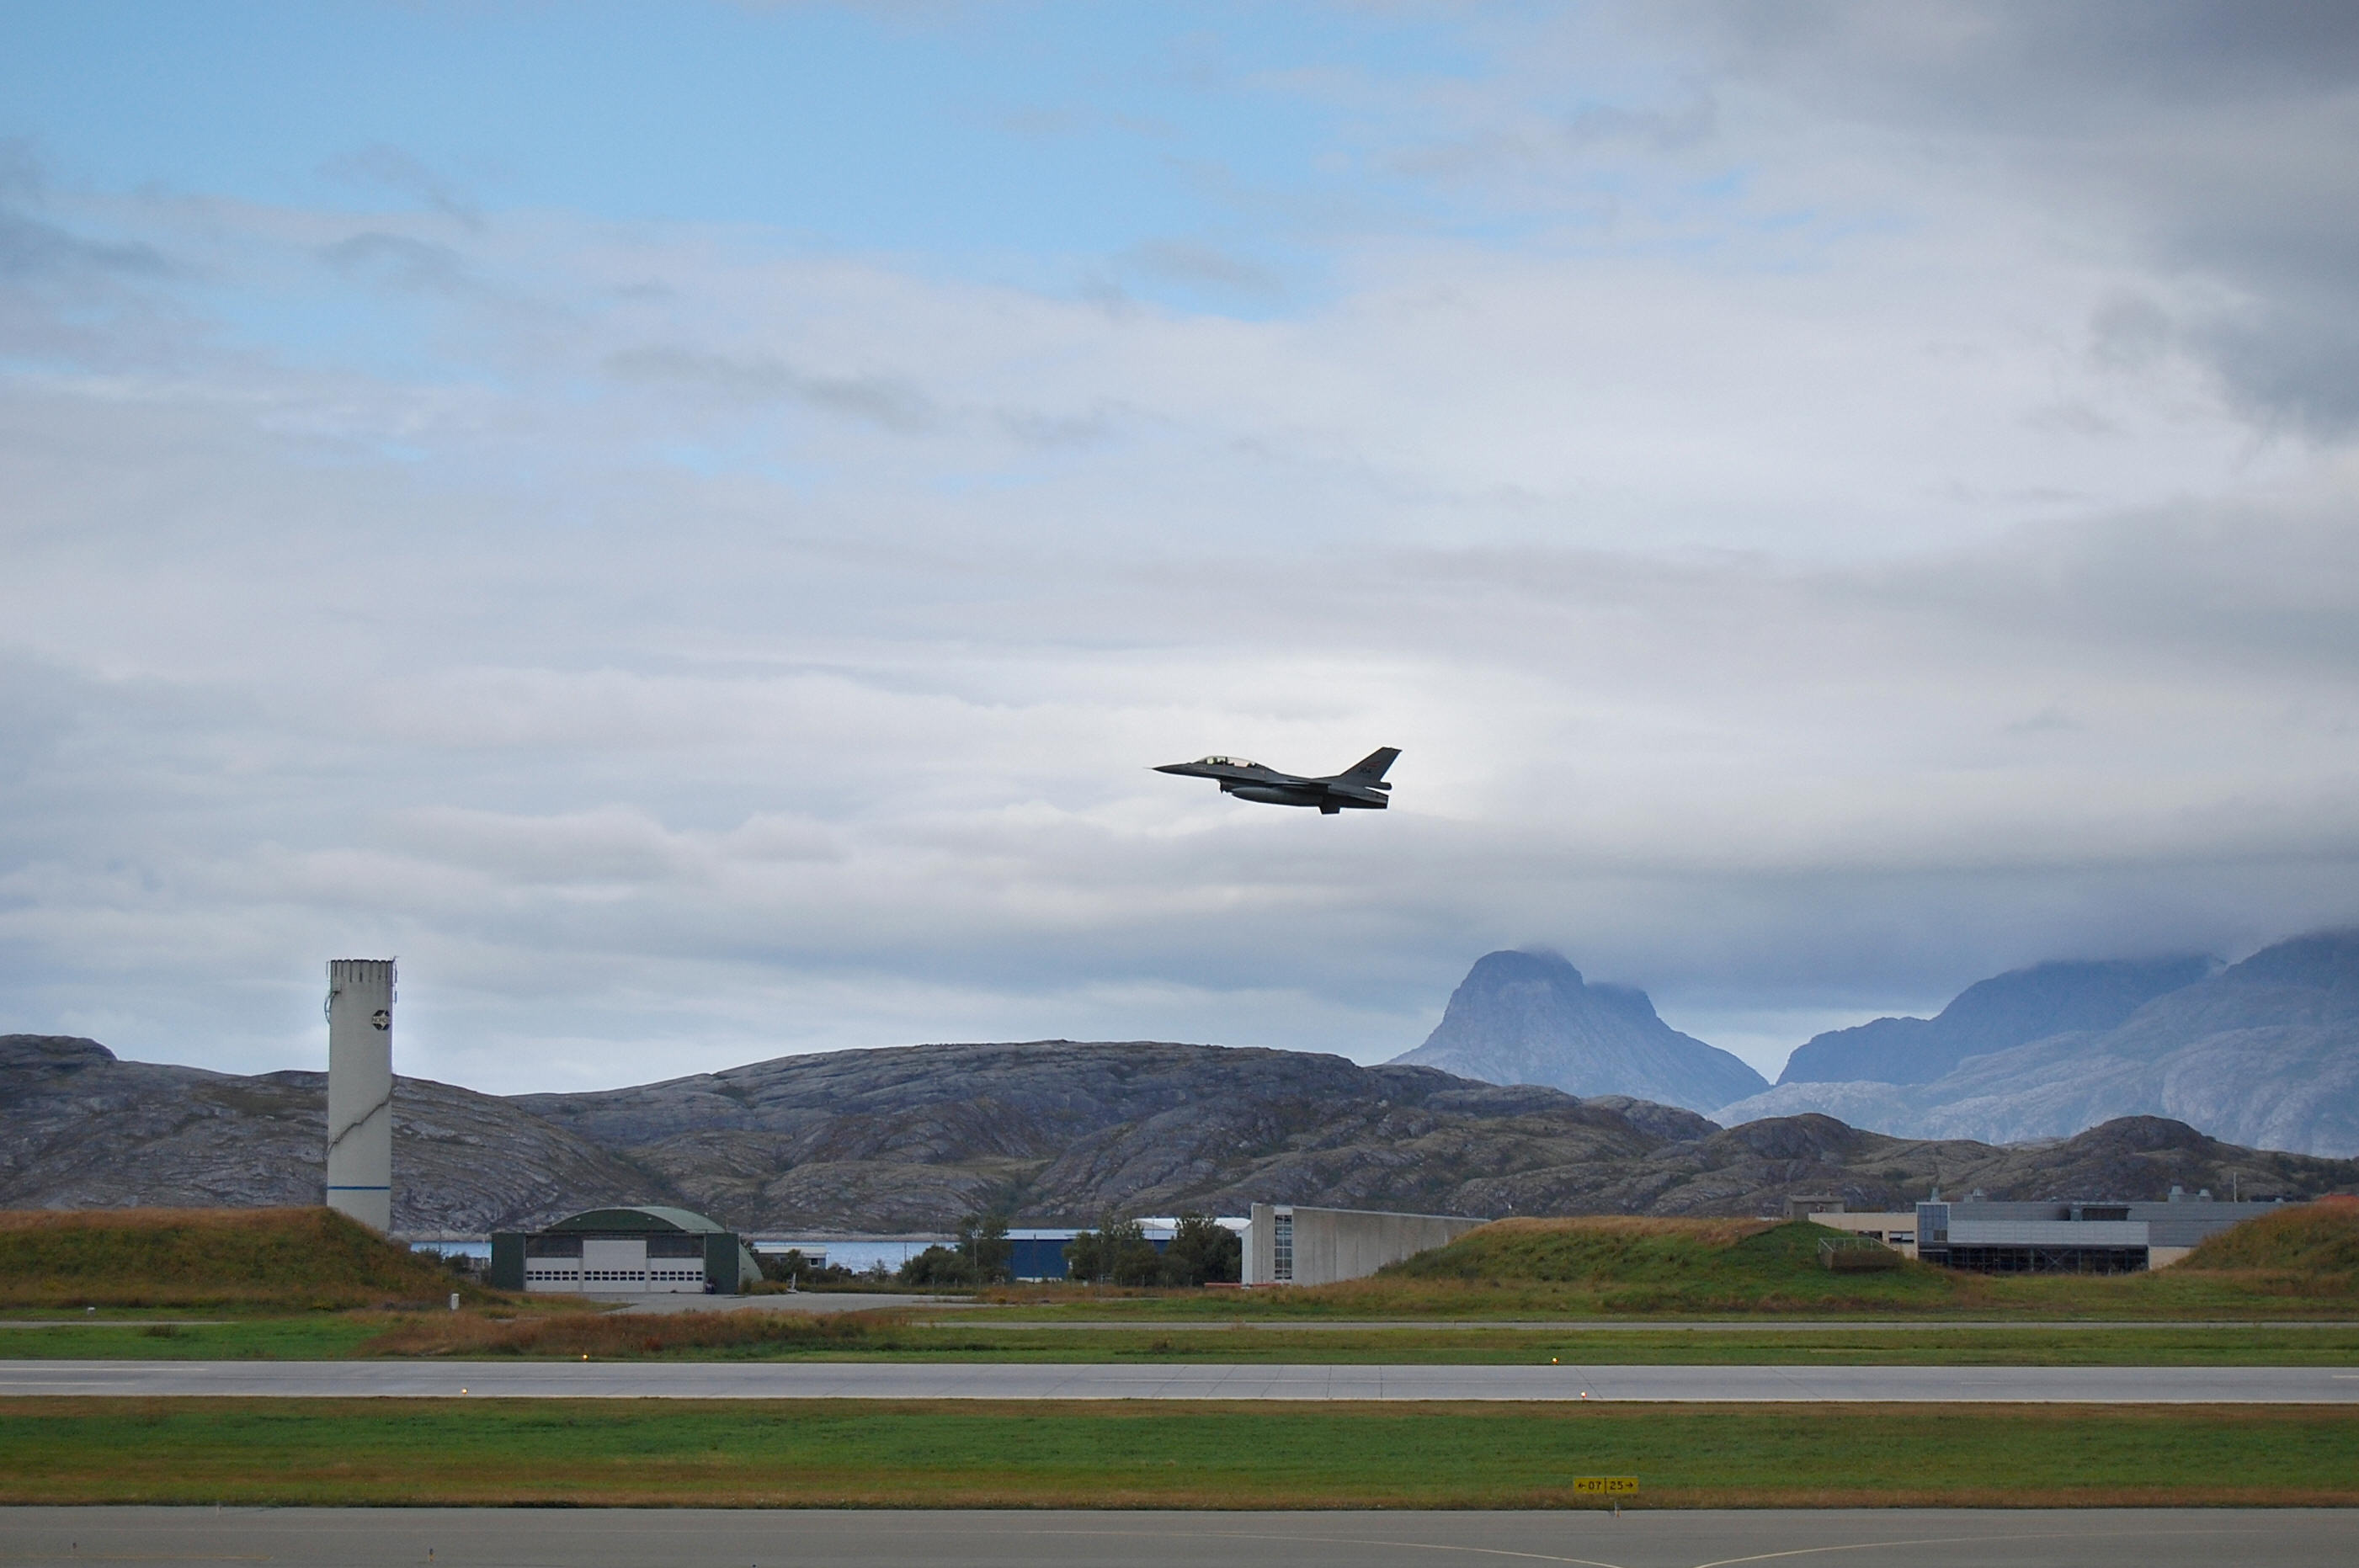 A Norwegian F16 in the air at the aircraft base in Bodoe, northern Norway on August 21, 2008. At the base, situated above the Arctic Circle, two F16s are permanently mobilized ready to scramble within 15 minutes to encounter a potential threat. (Pierre-Henry Deshayes/AFP/Getty Images)